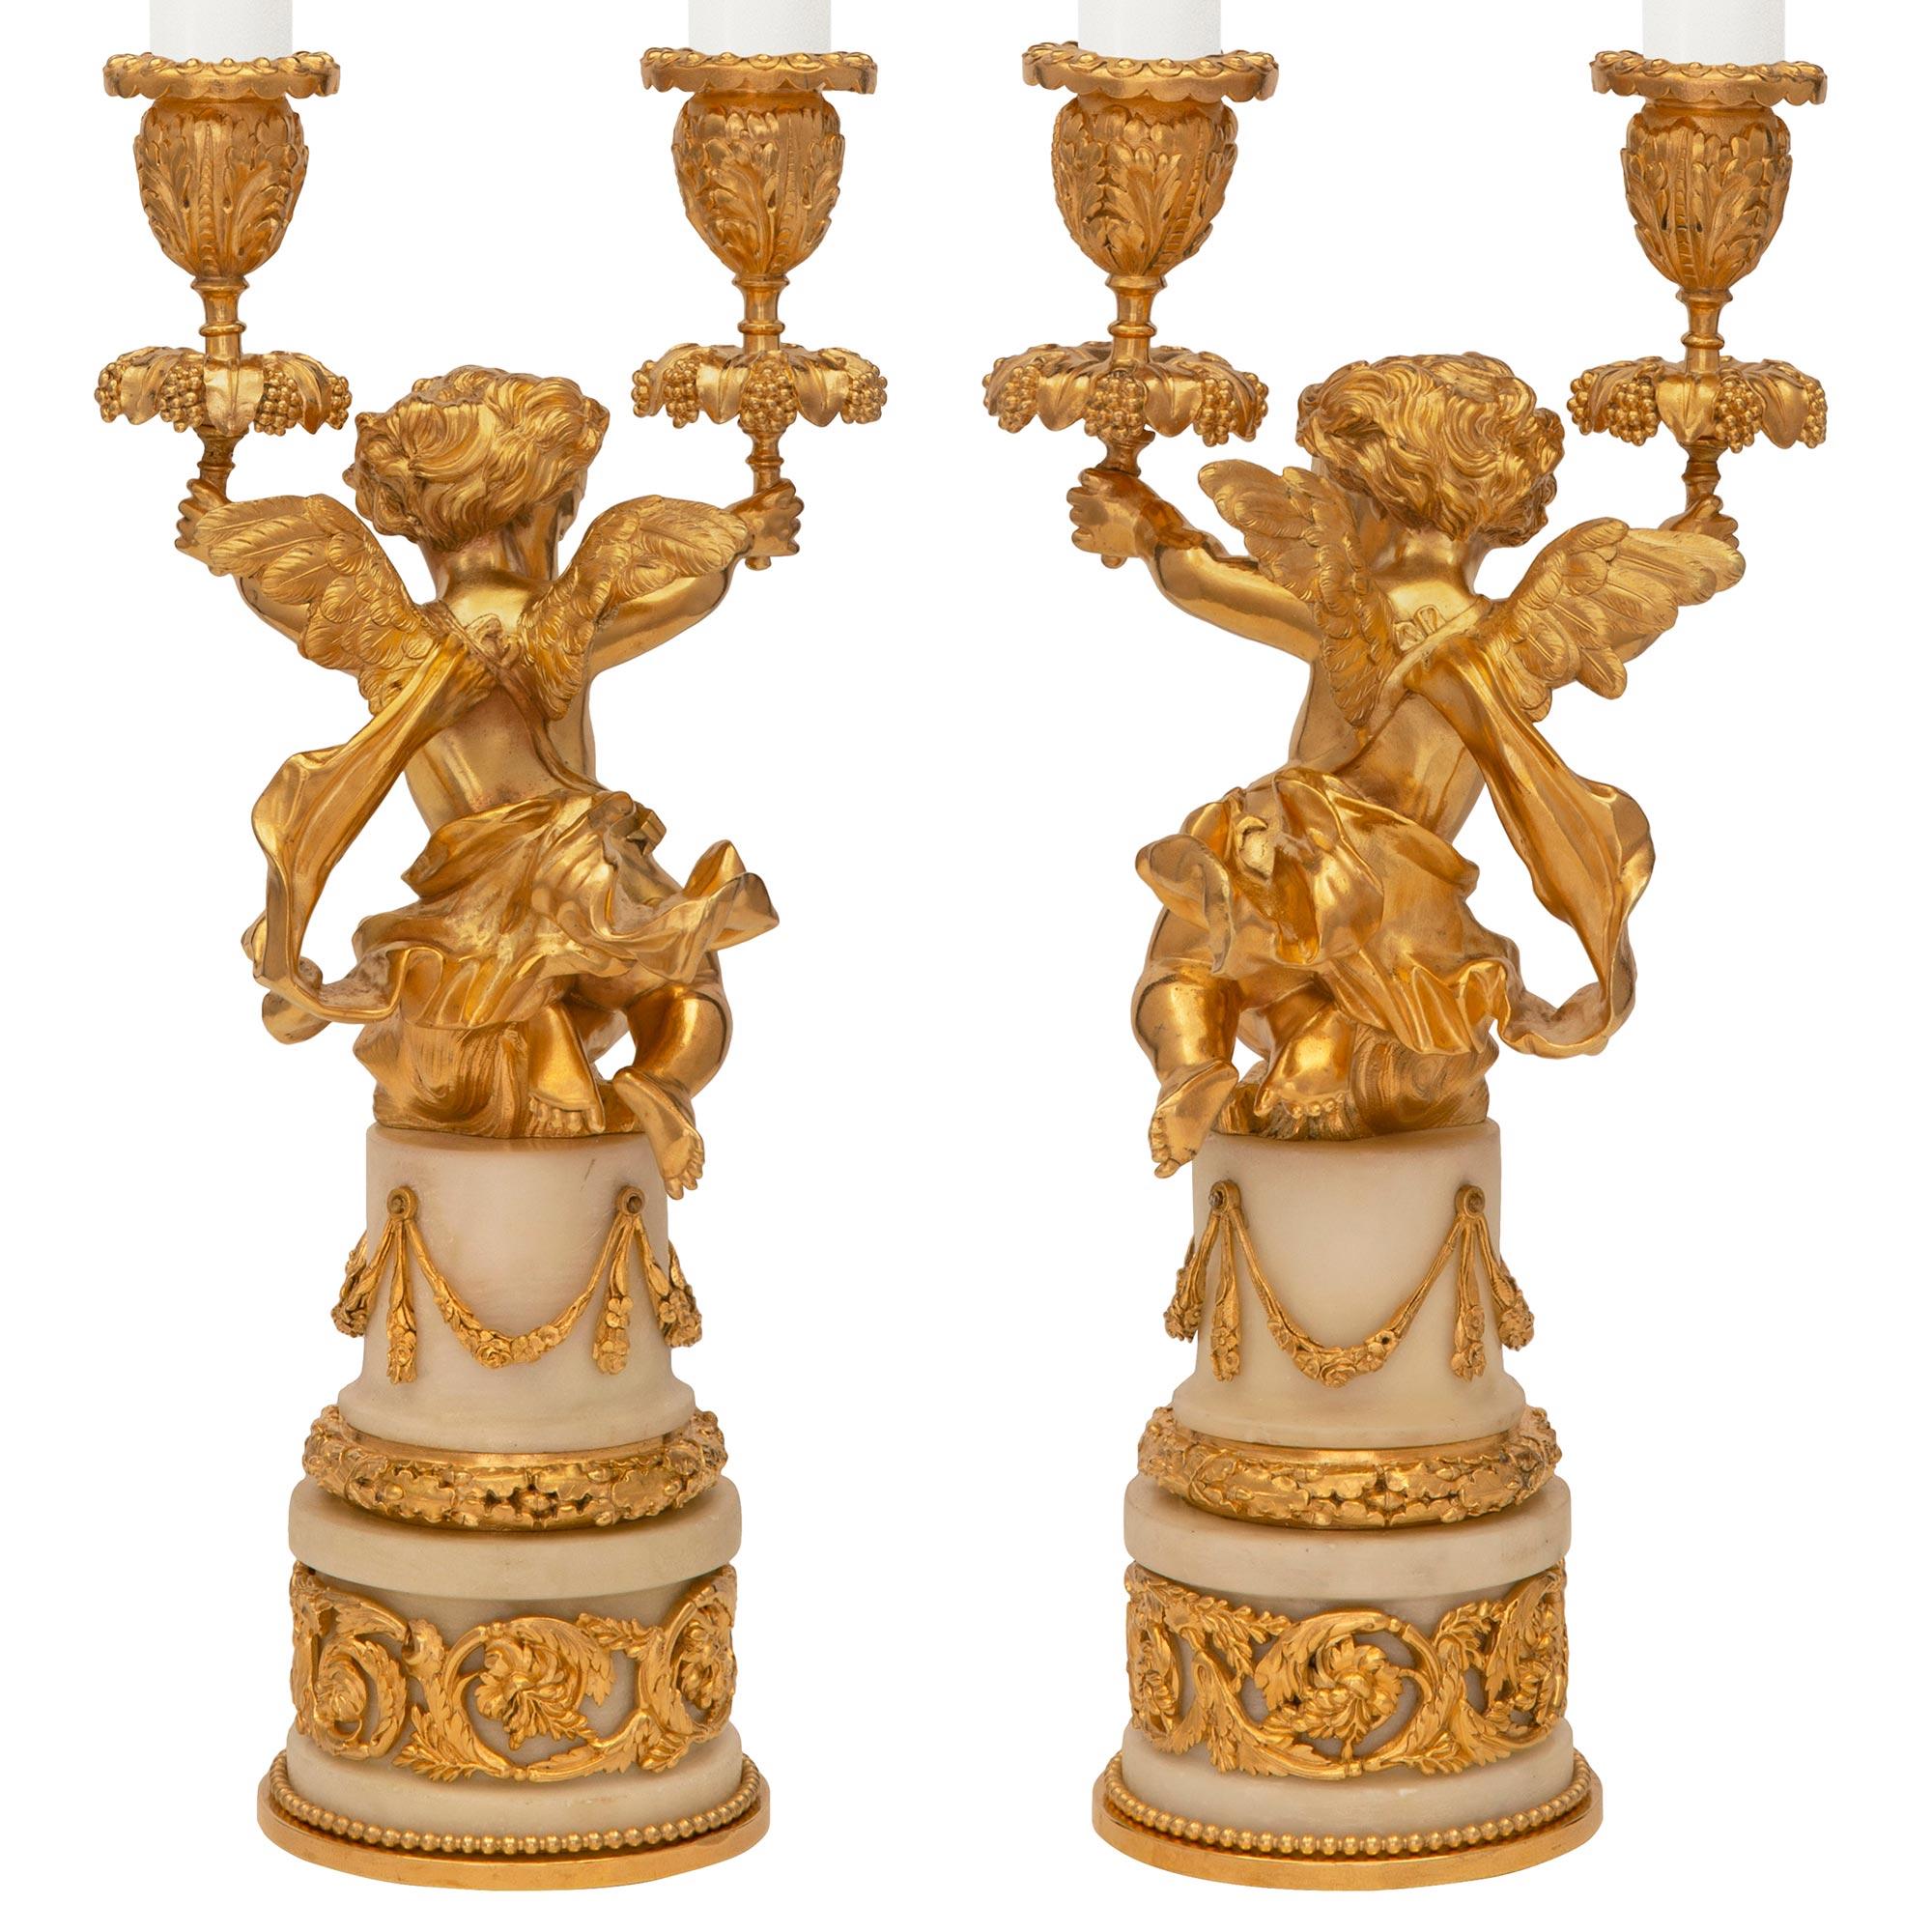 A charming and very high quality true pair of French 19th century Louis XVI st. ormolu and white Carrara marble candelabras. Each two arm candelabra is raised by a circular white Carrara marble base with a fine stepped design with a bottom beaded